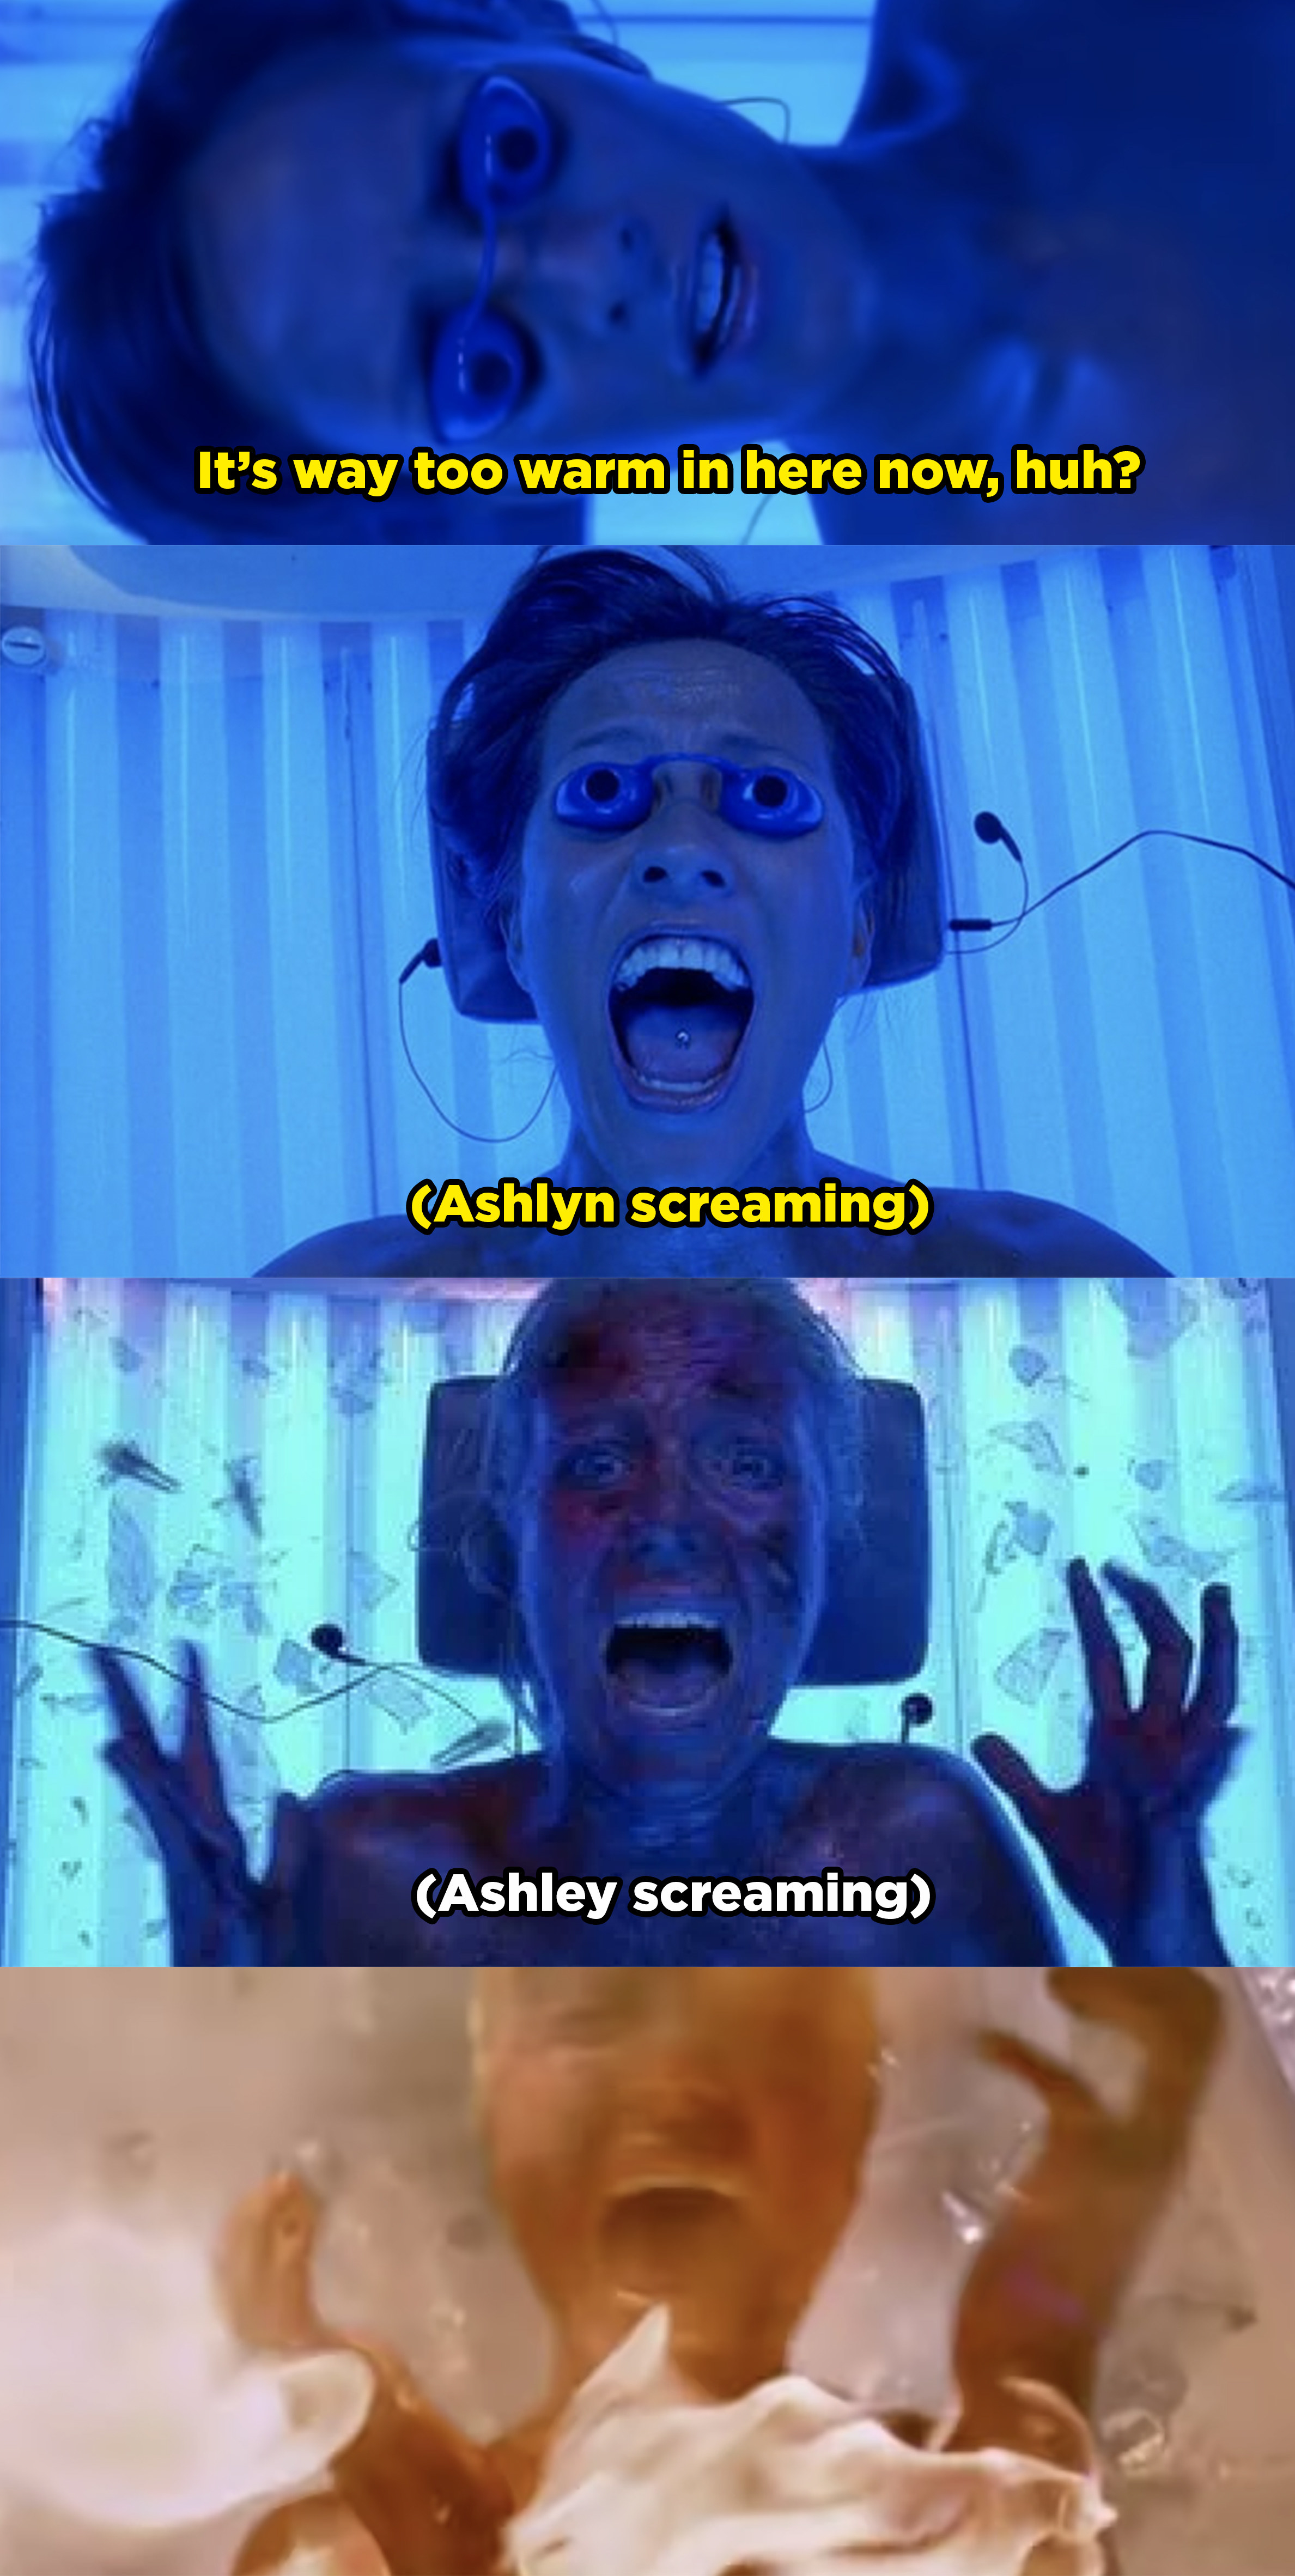 Ashley and Ashlyn start to realize the tanning bed is getting too hot. Their skin starts blistering and they start screaming, then they realize they can&#x27;t get out of the beds as they burst into flames.